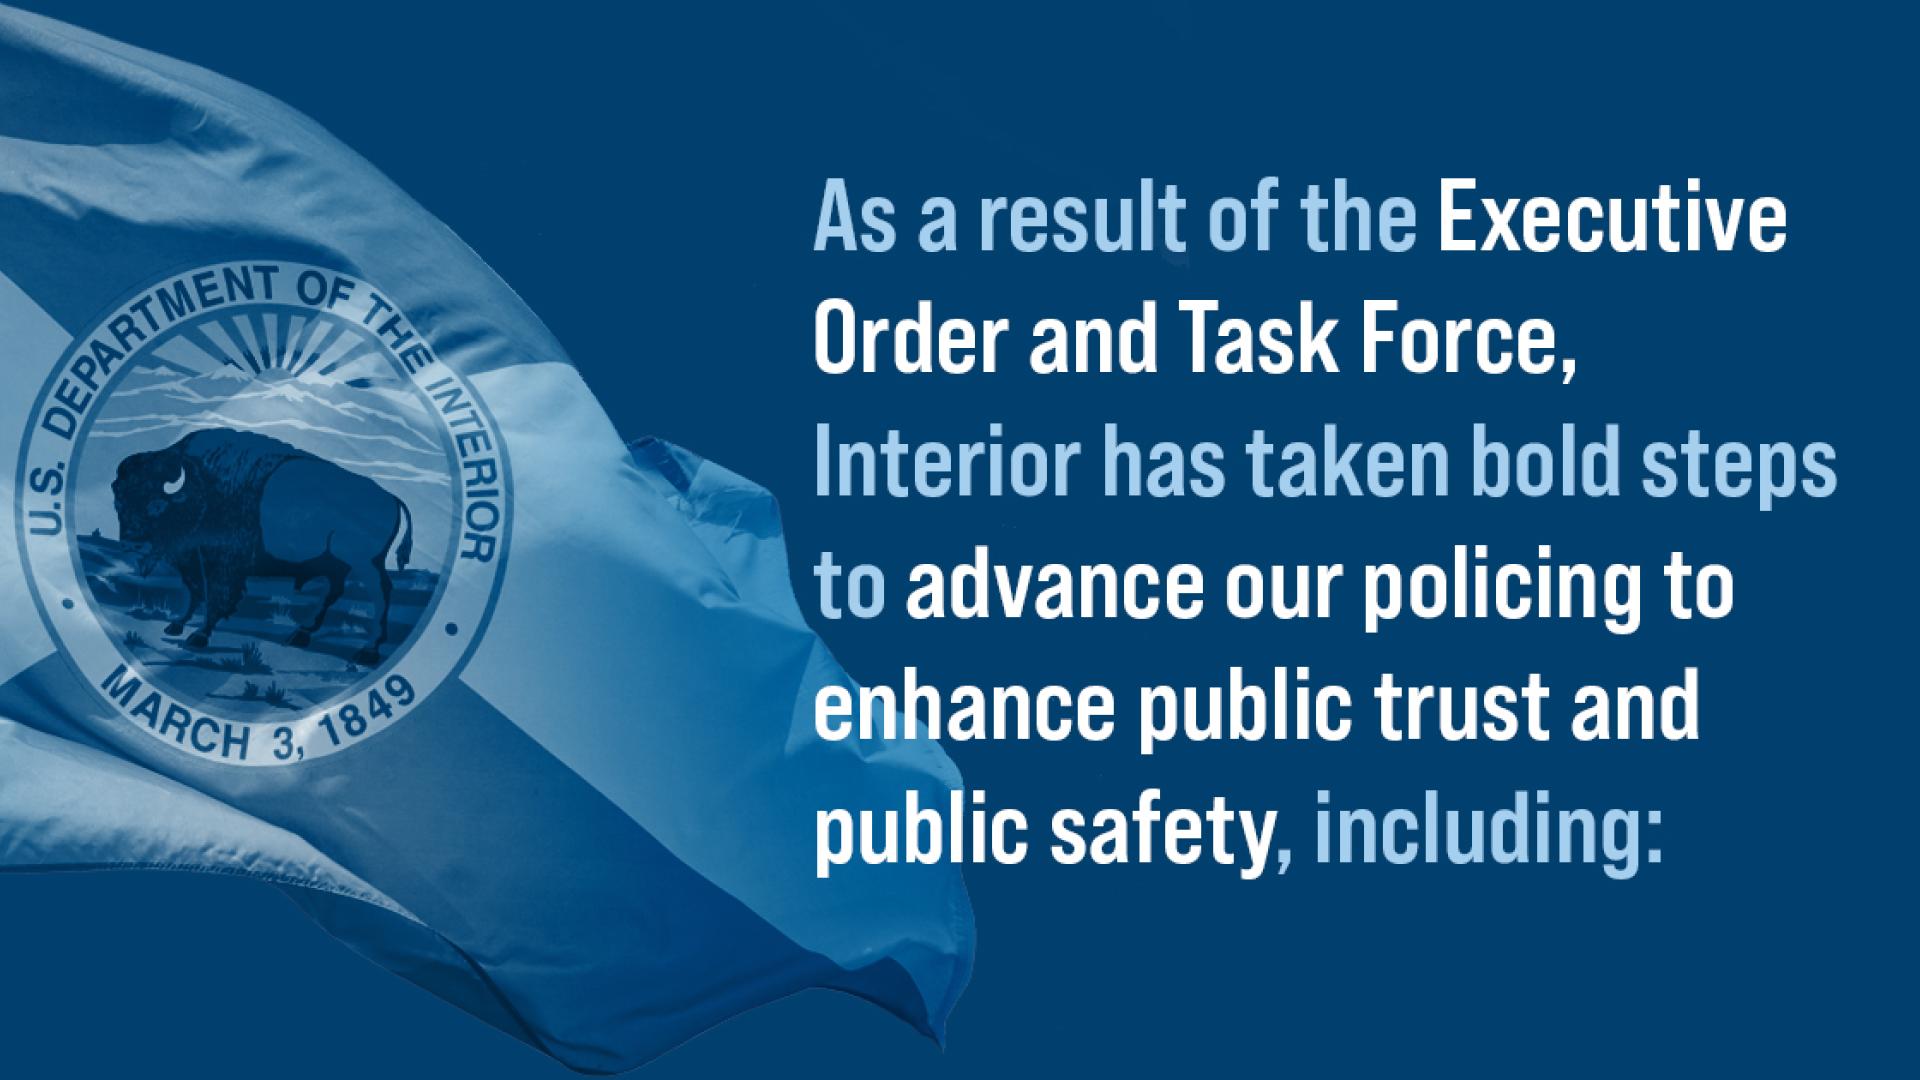 This guidance will ensure the highest standards to build trust and protect the public - banner